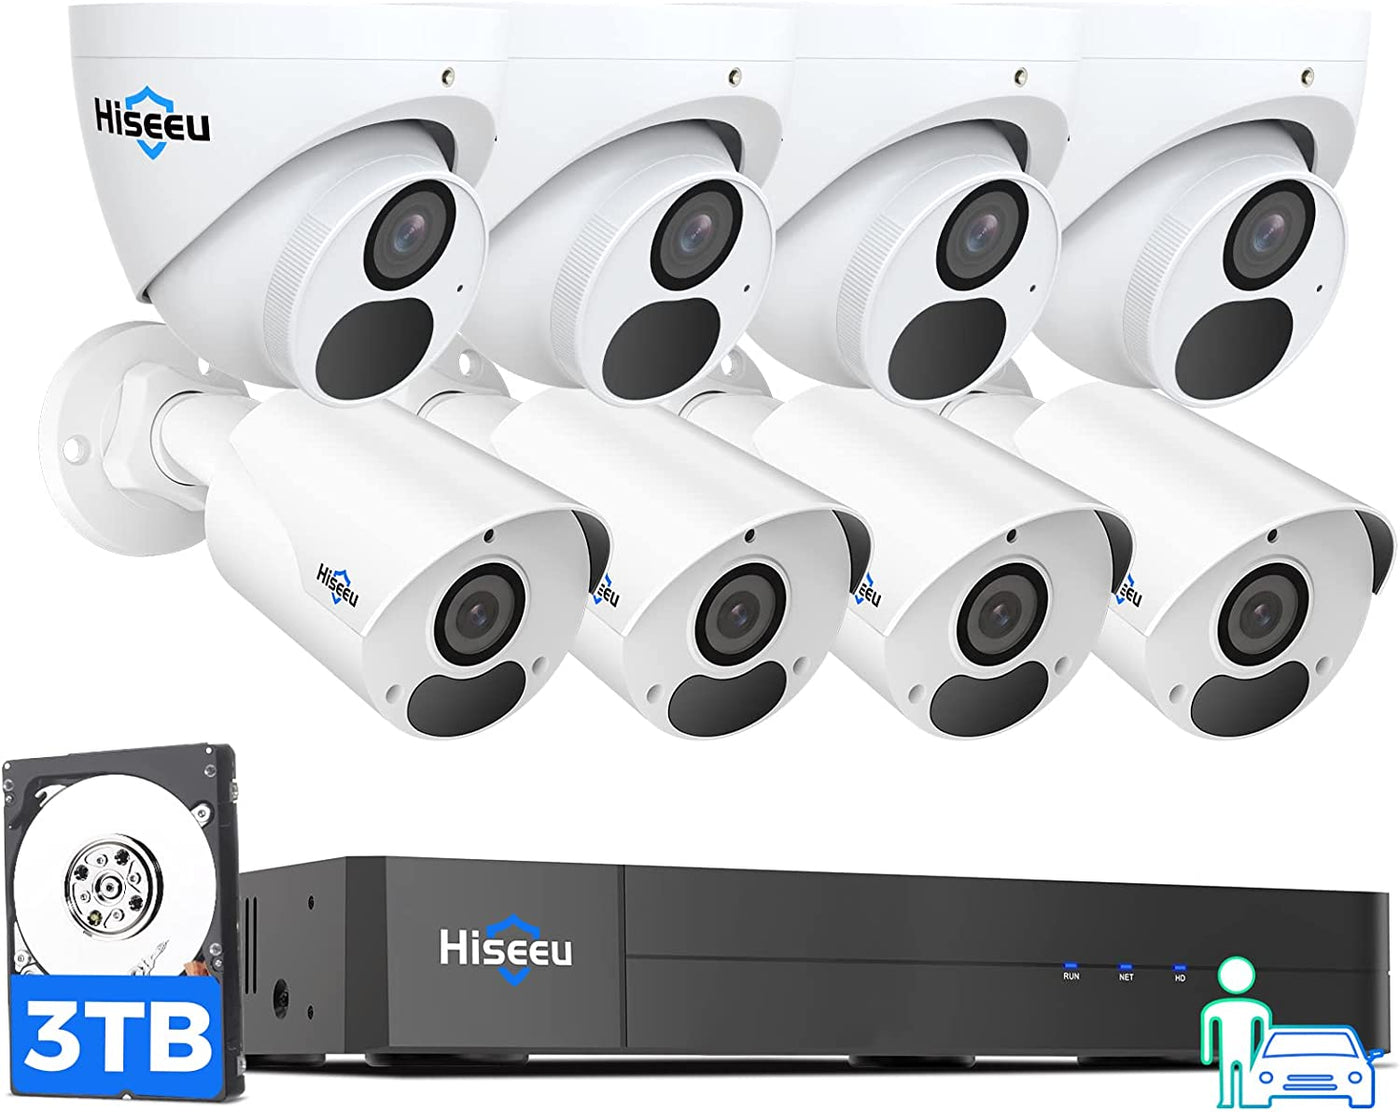 Hiseeu [121° View Angle+ WDR] 4K PoE Security Camera System,8Pcs 8MP Dome/Bullet Cameras Indoor/Outdoor, Person/Human Detect, H.265+IP 67 Waterproof, 100ft Night Vision, 3TB HDD for Home 24/7 Recording